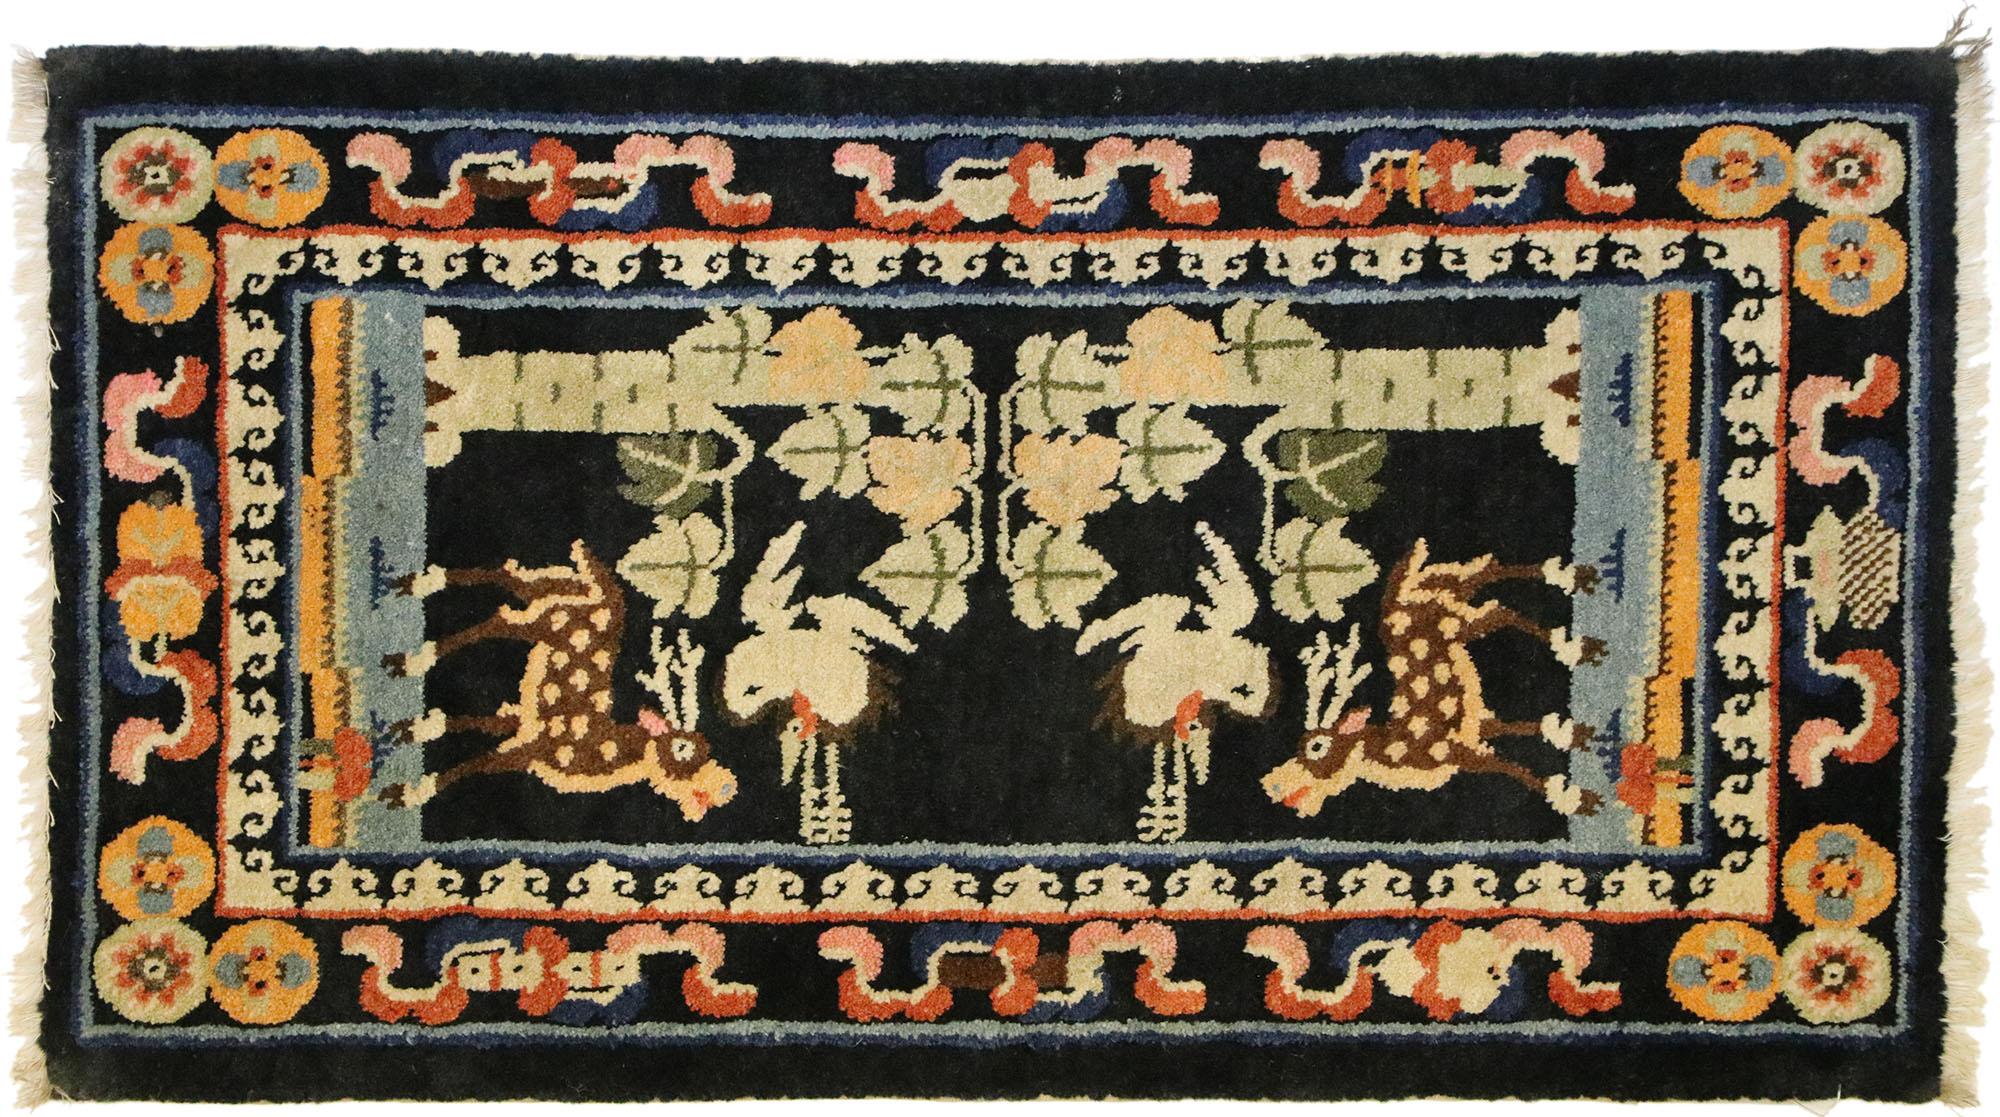 20th Century Antique Chinese Pictorial Rug with Deer and Crane, Small Accent Rug